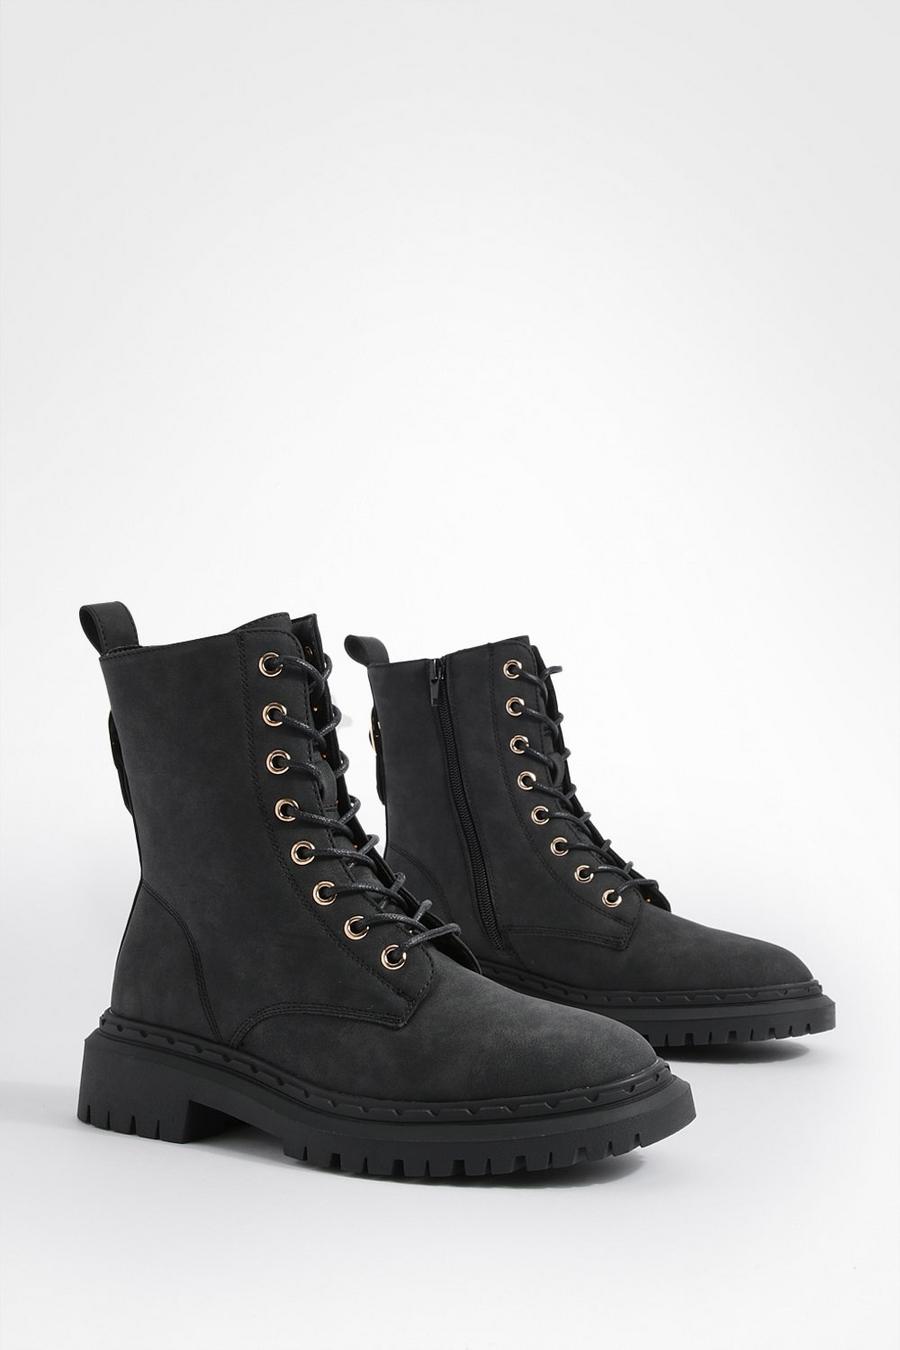 Black noir Cleated Rand Detail Lace Up Hiker Boots 